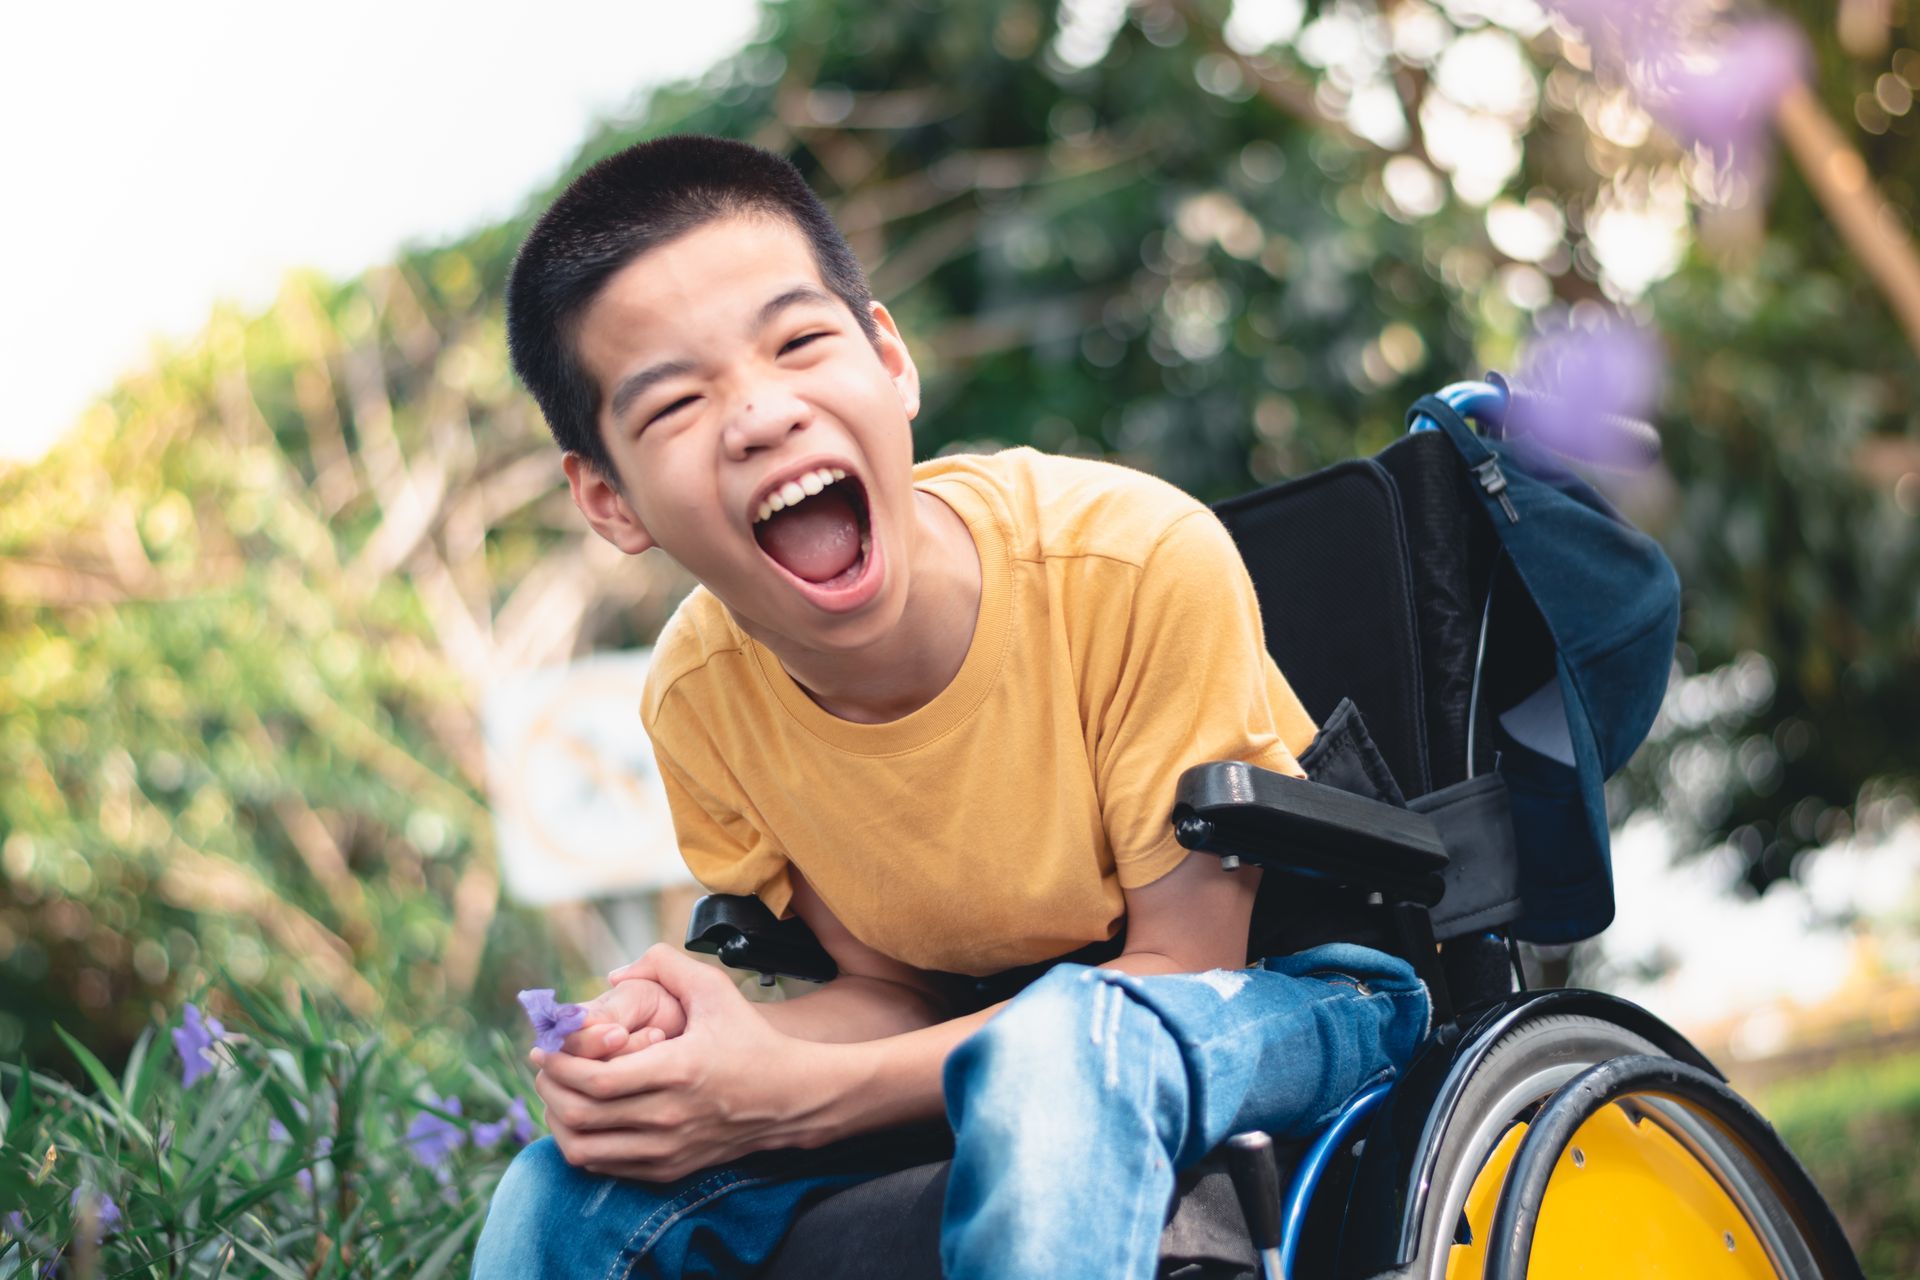 Young male NDIS participant in wheel chair wearing yellow shirt smiling - helps continuity of care